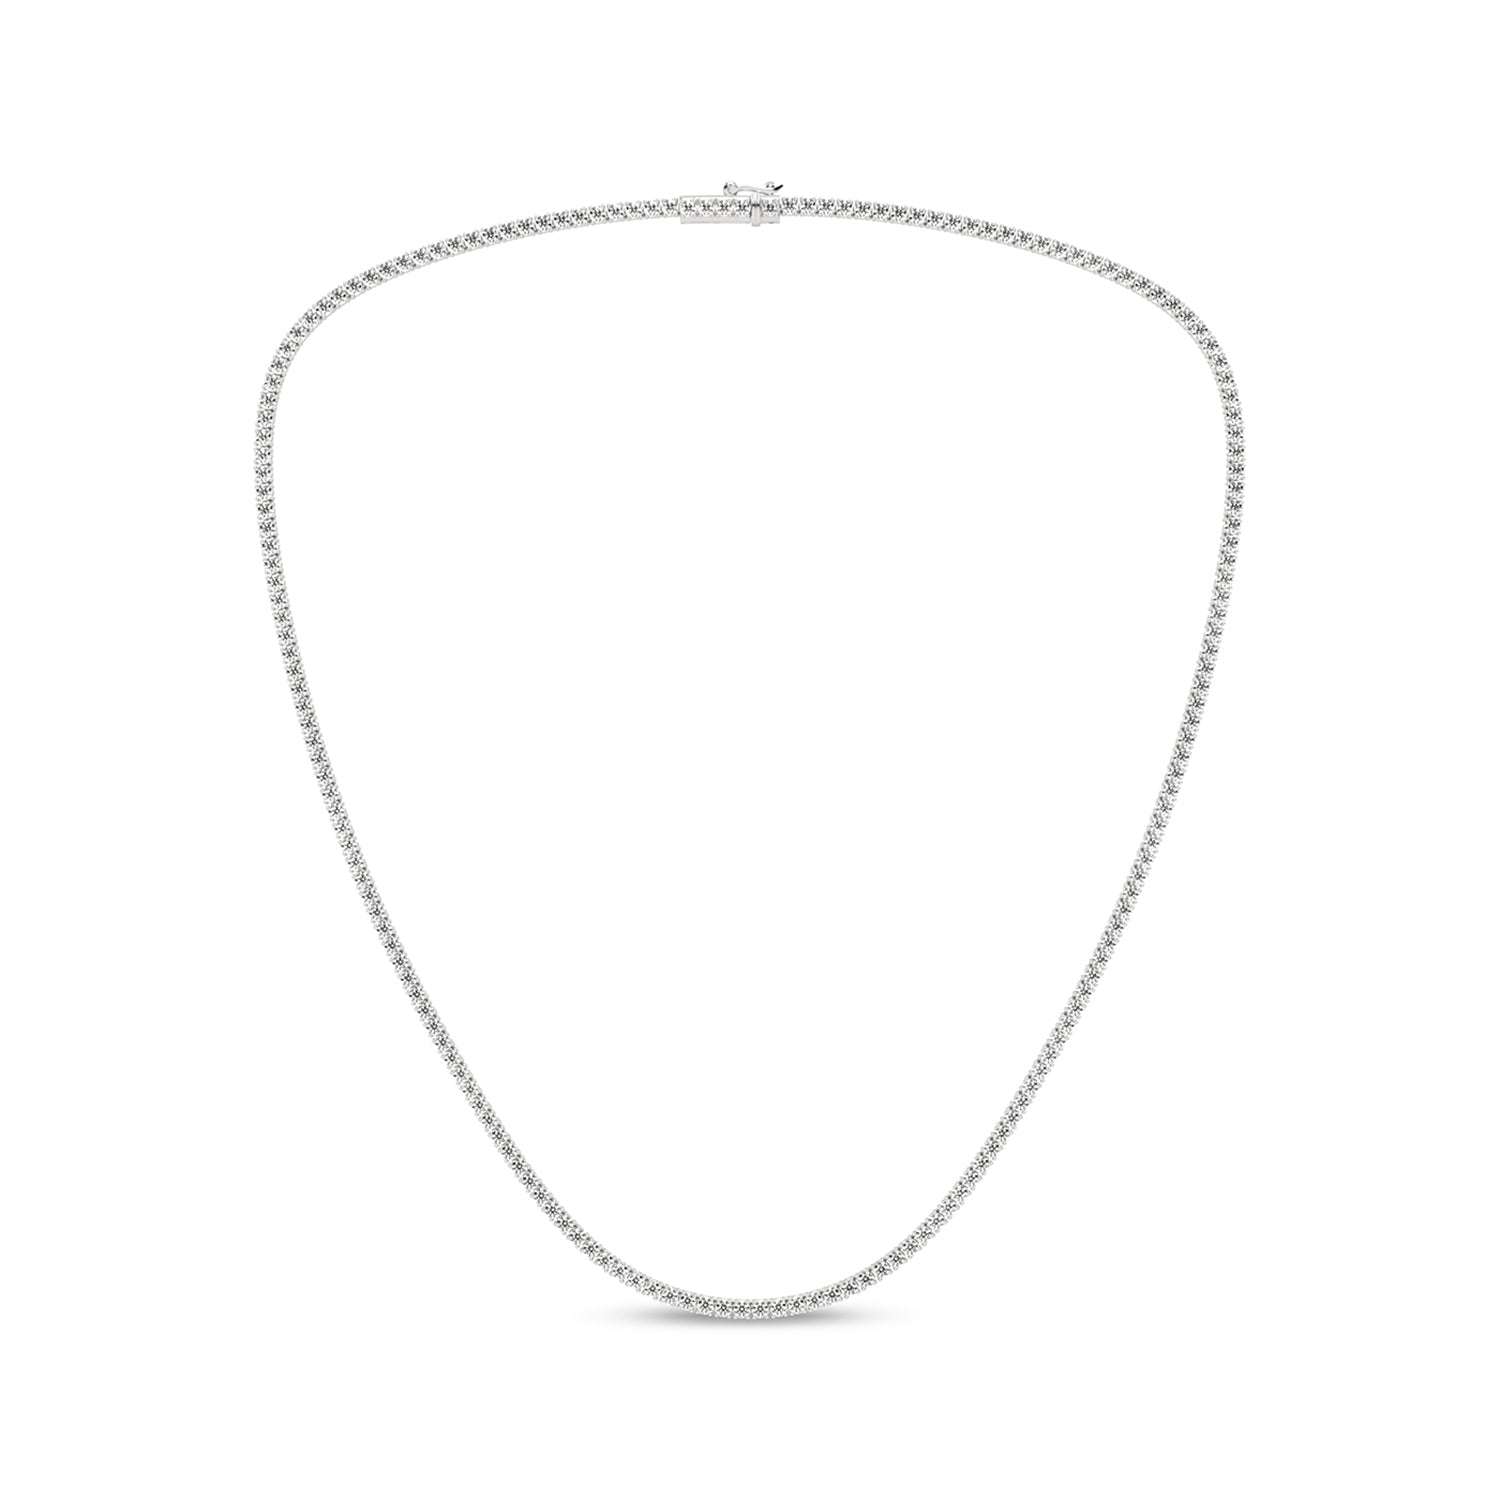 Enchanting Atmos Tennis Necklace_Product Angle_5 Ct. - 1